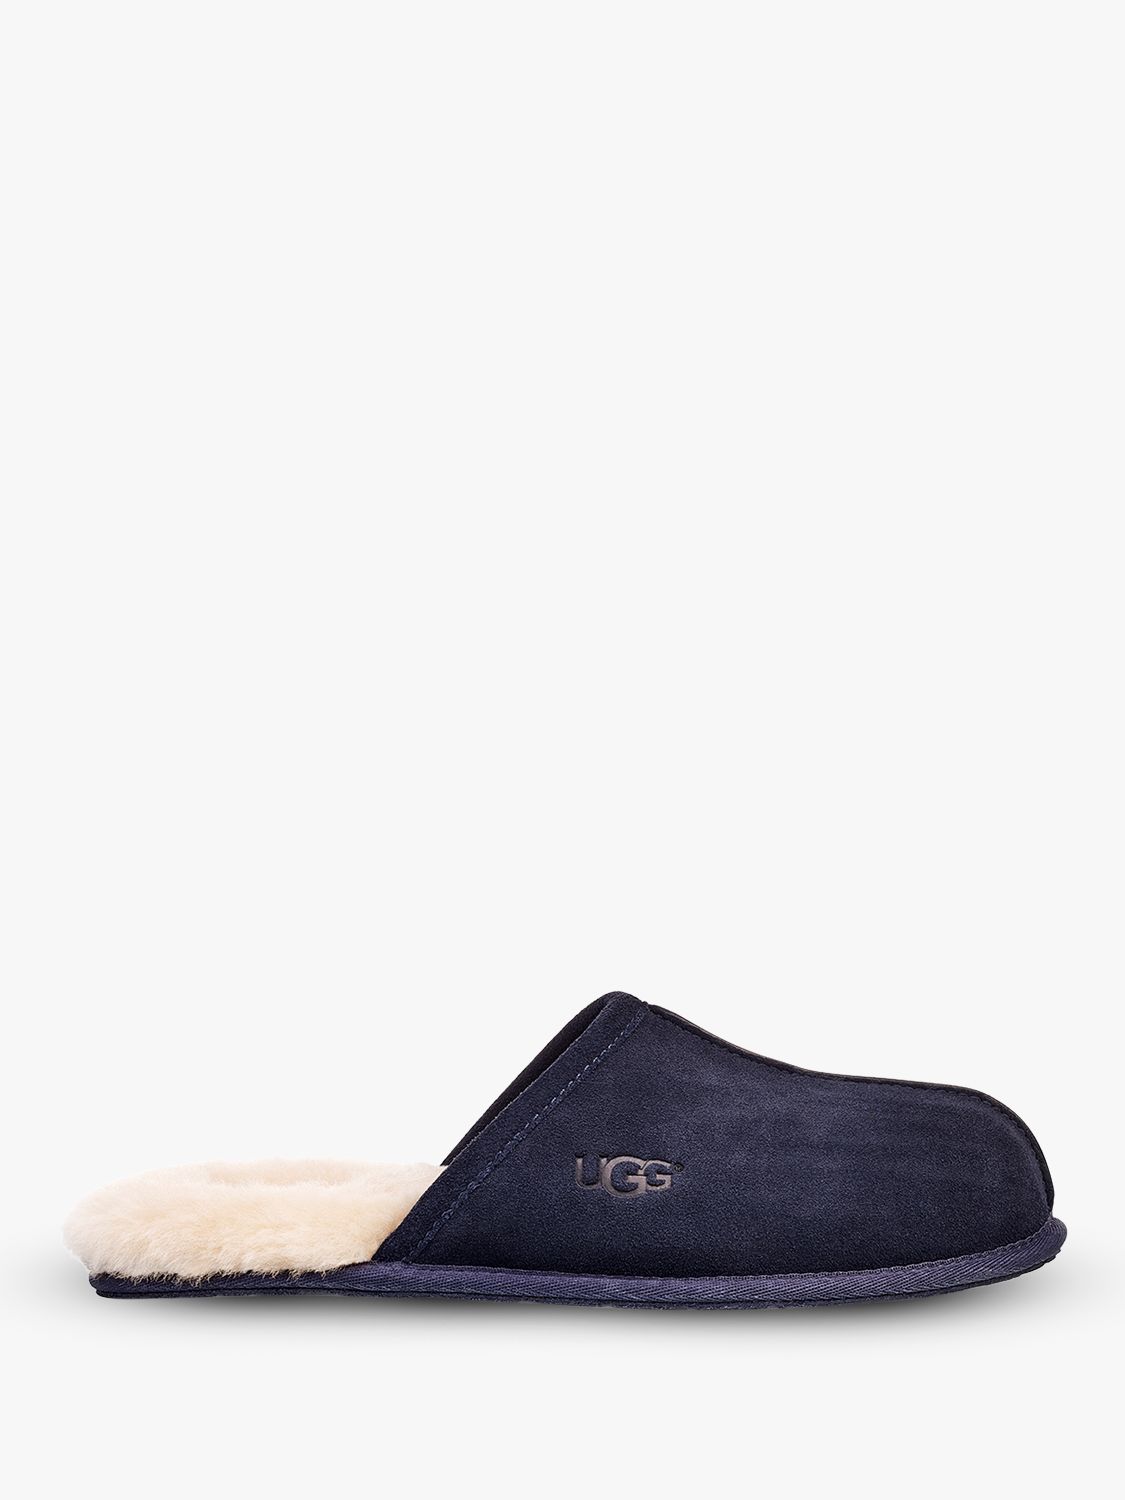 UGG Scuff Suede Slippers, Navy at John Lewis & Partners